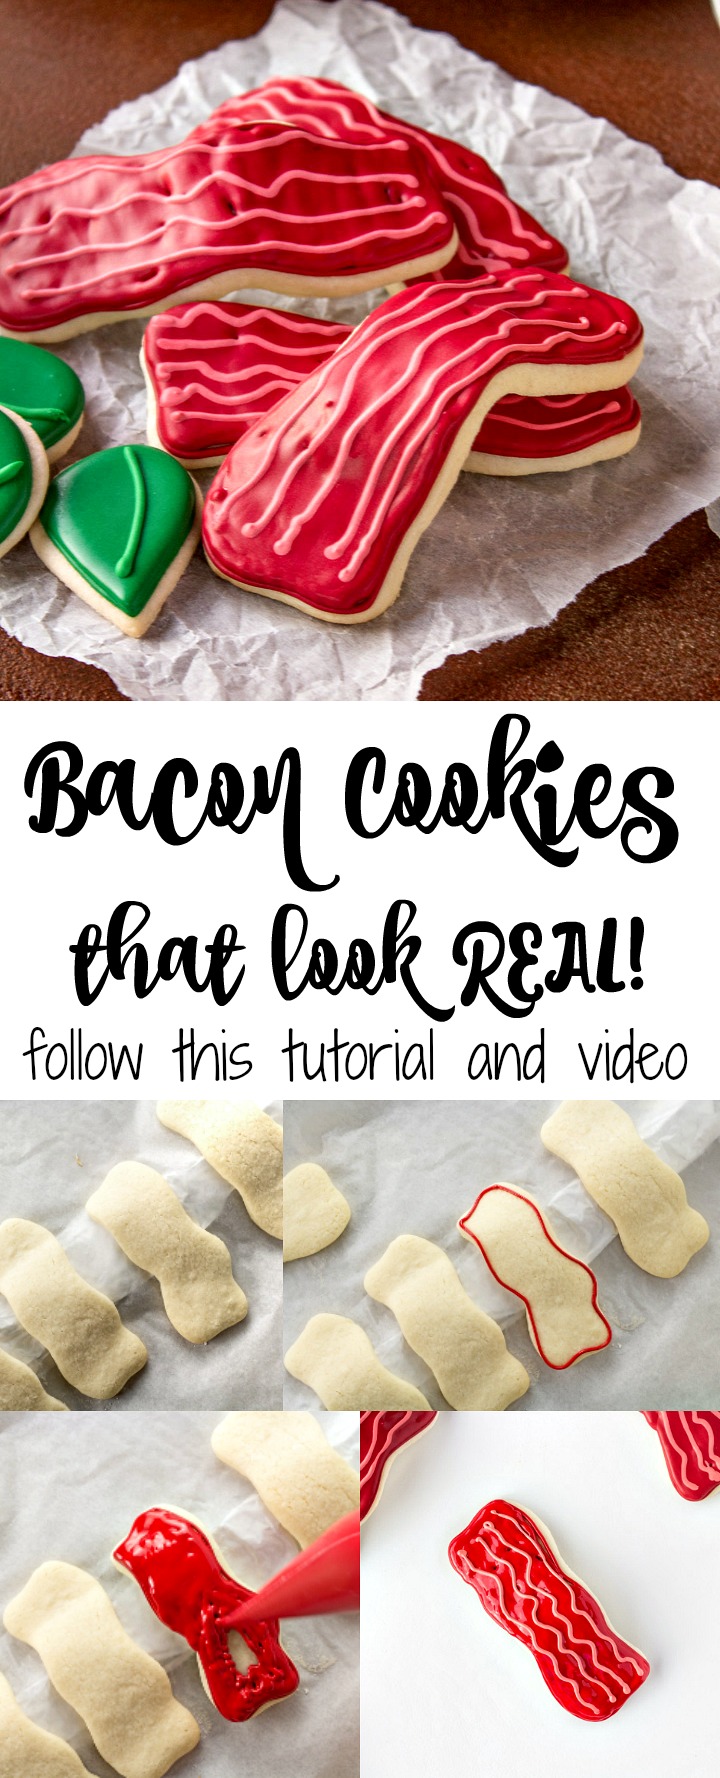 How to Make Simple Bacon Cookies with a How to Video | The Bearfoot Baker